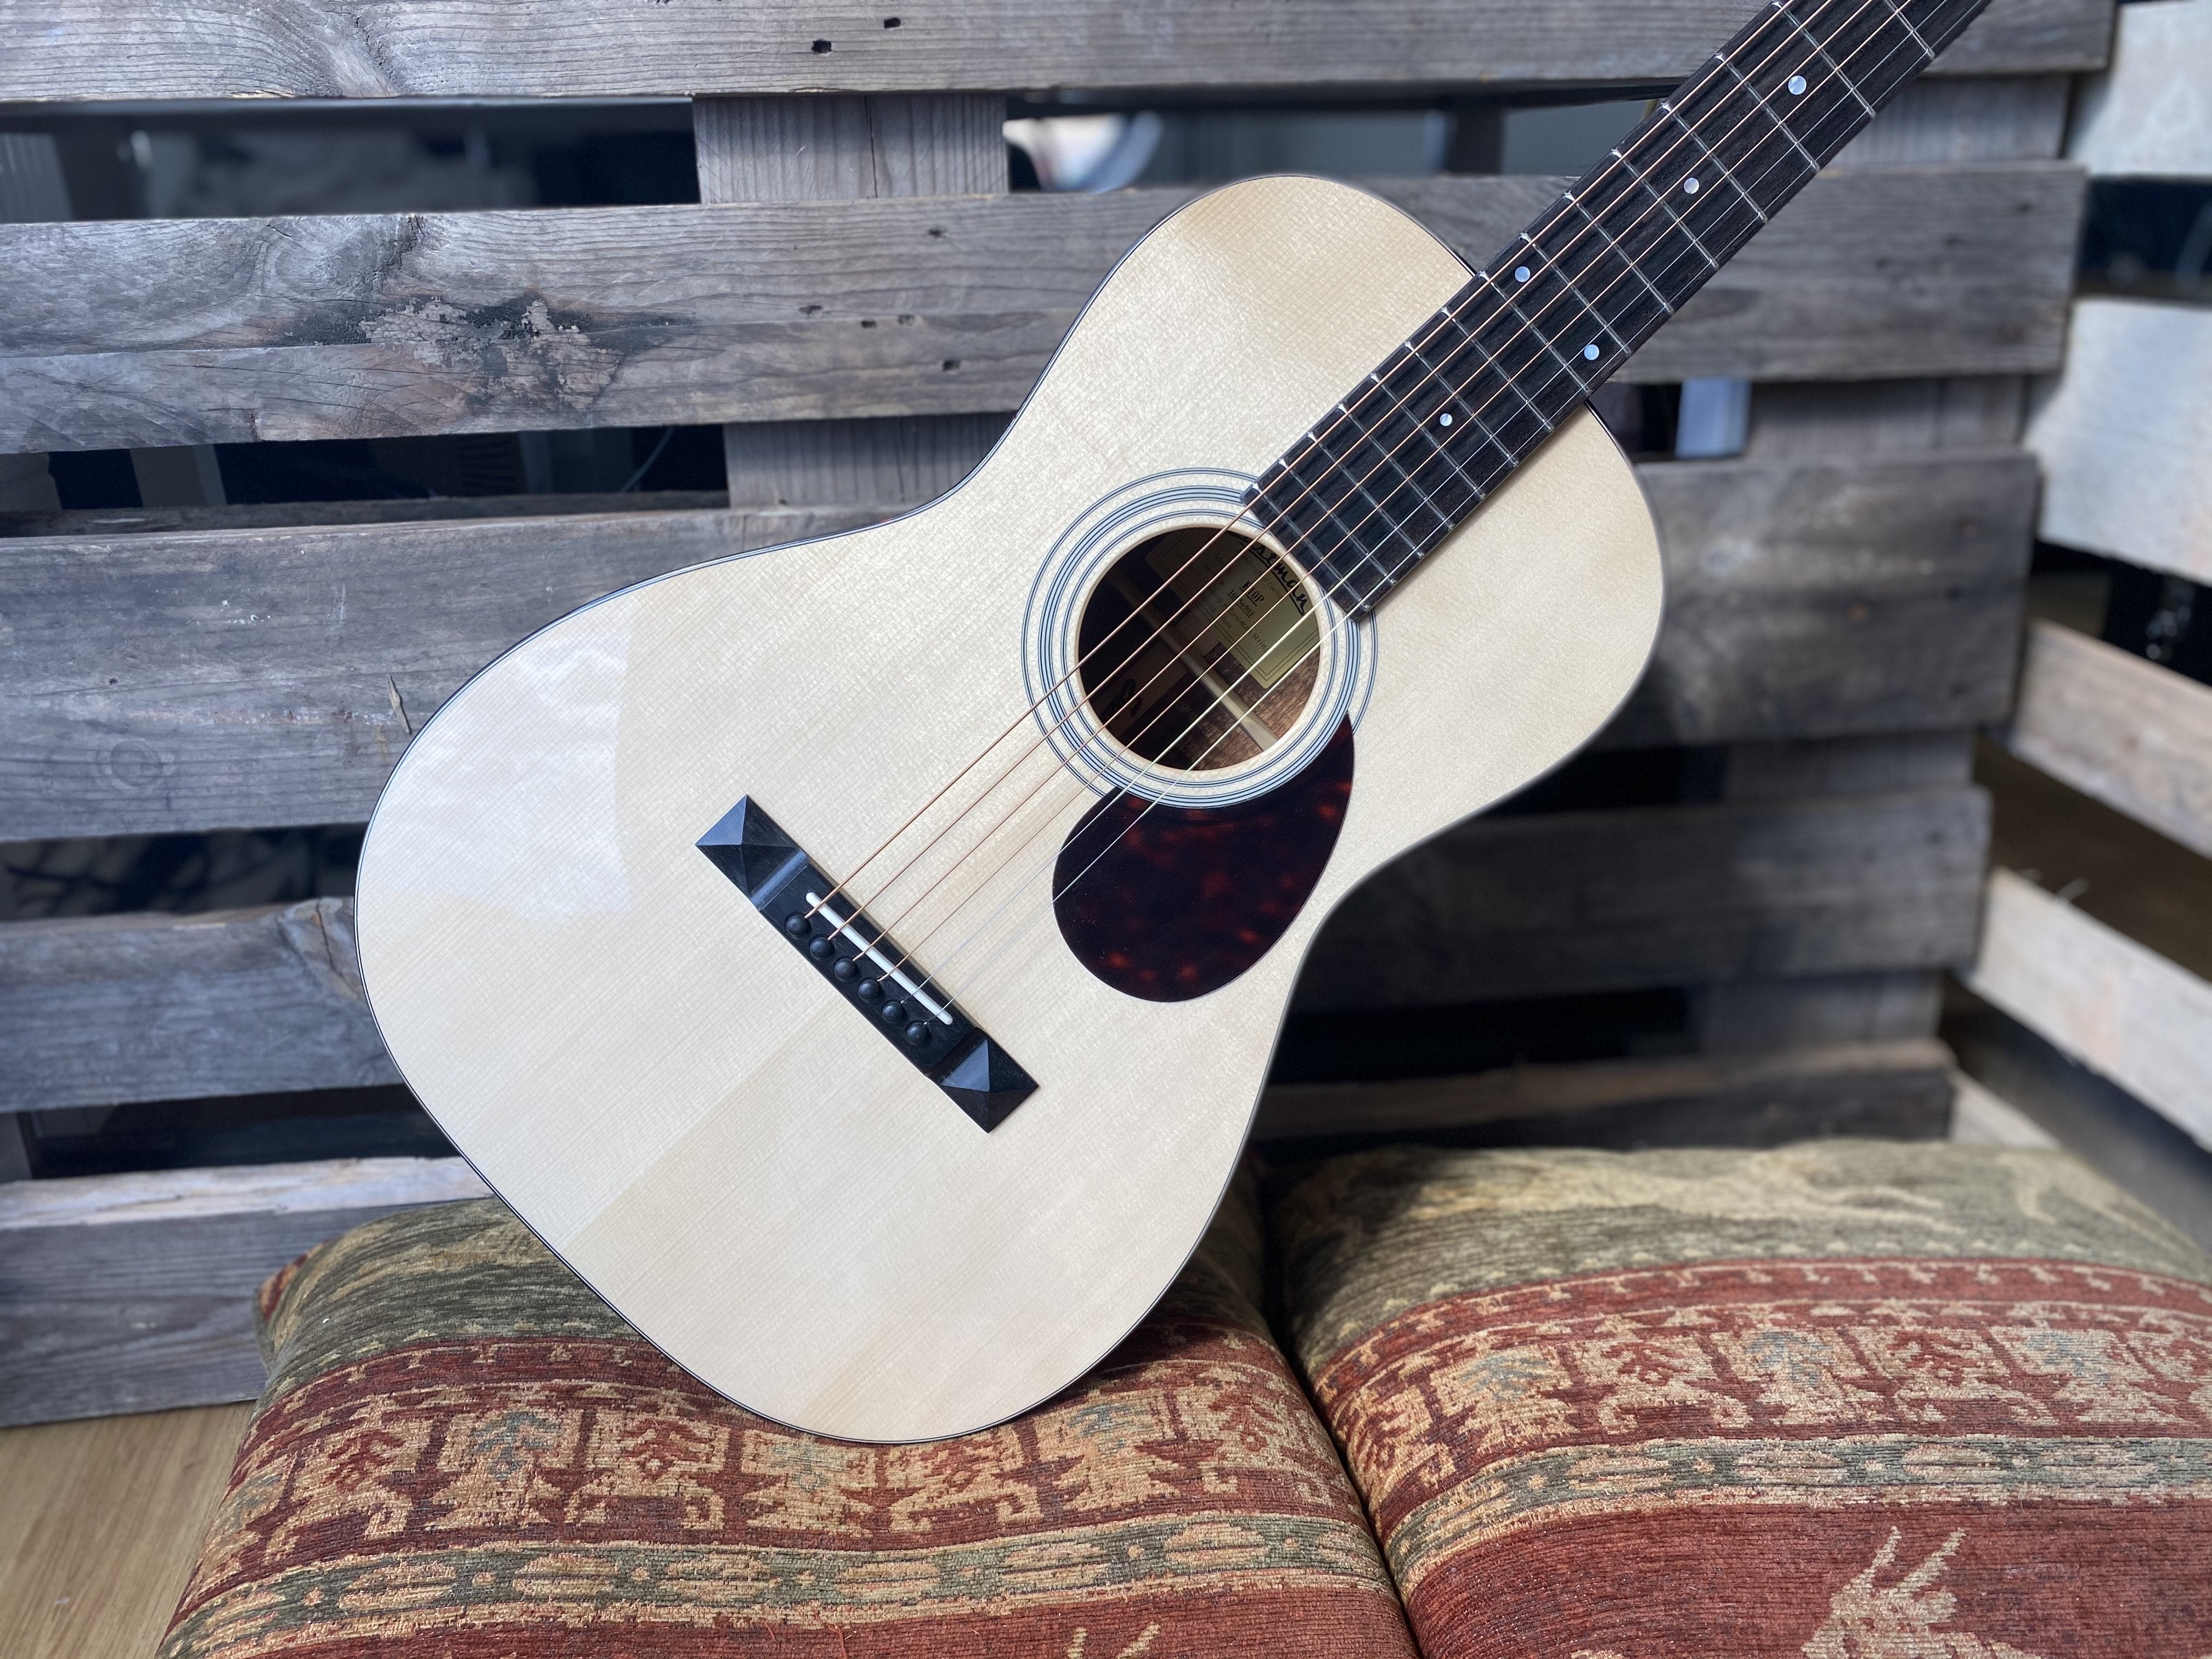 Eastman E10P TC Parlour model With Thermo Cured Top, Acoustic Guitar for sale at Richards Guitars.